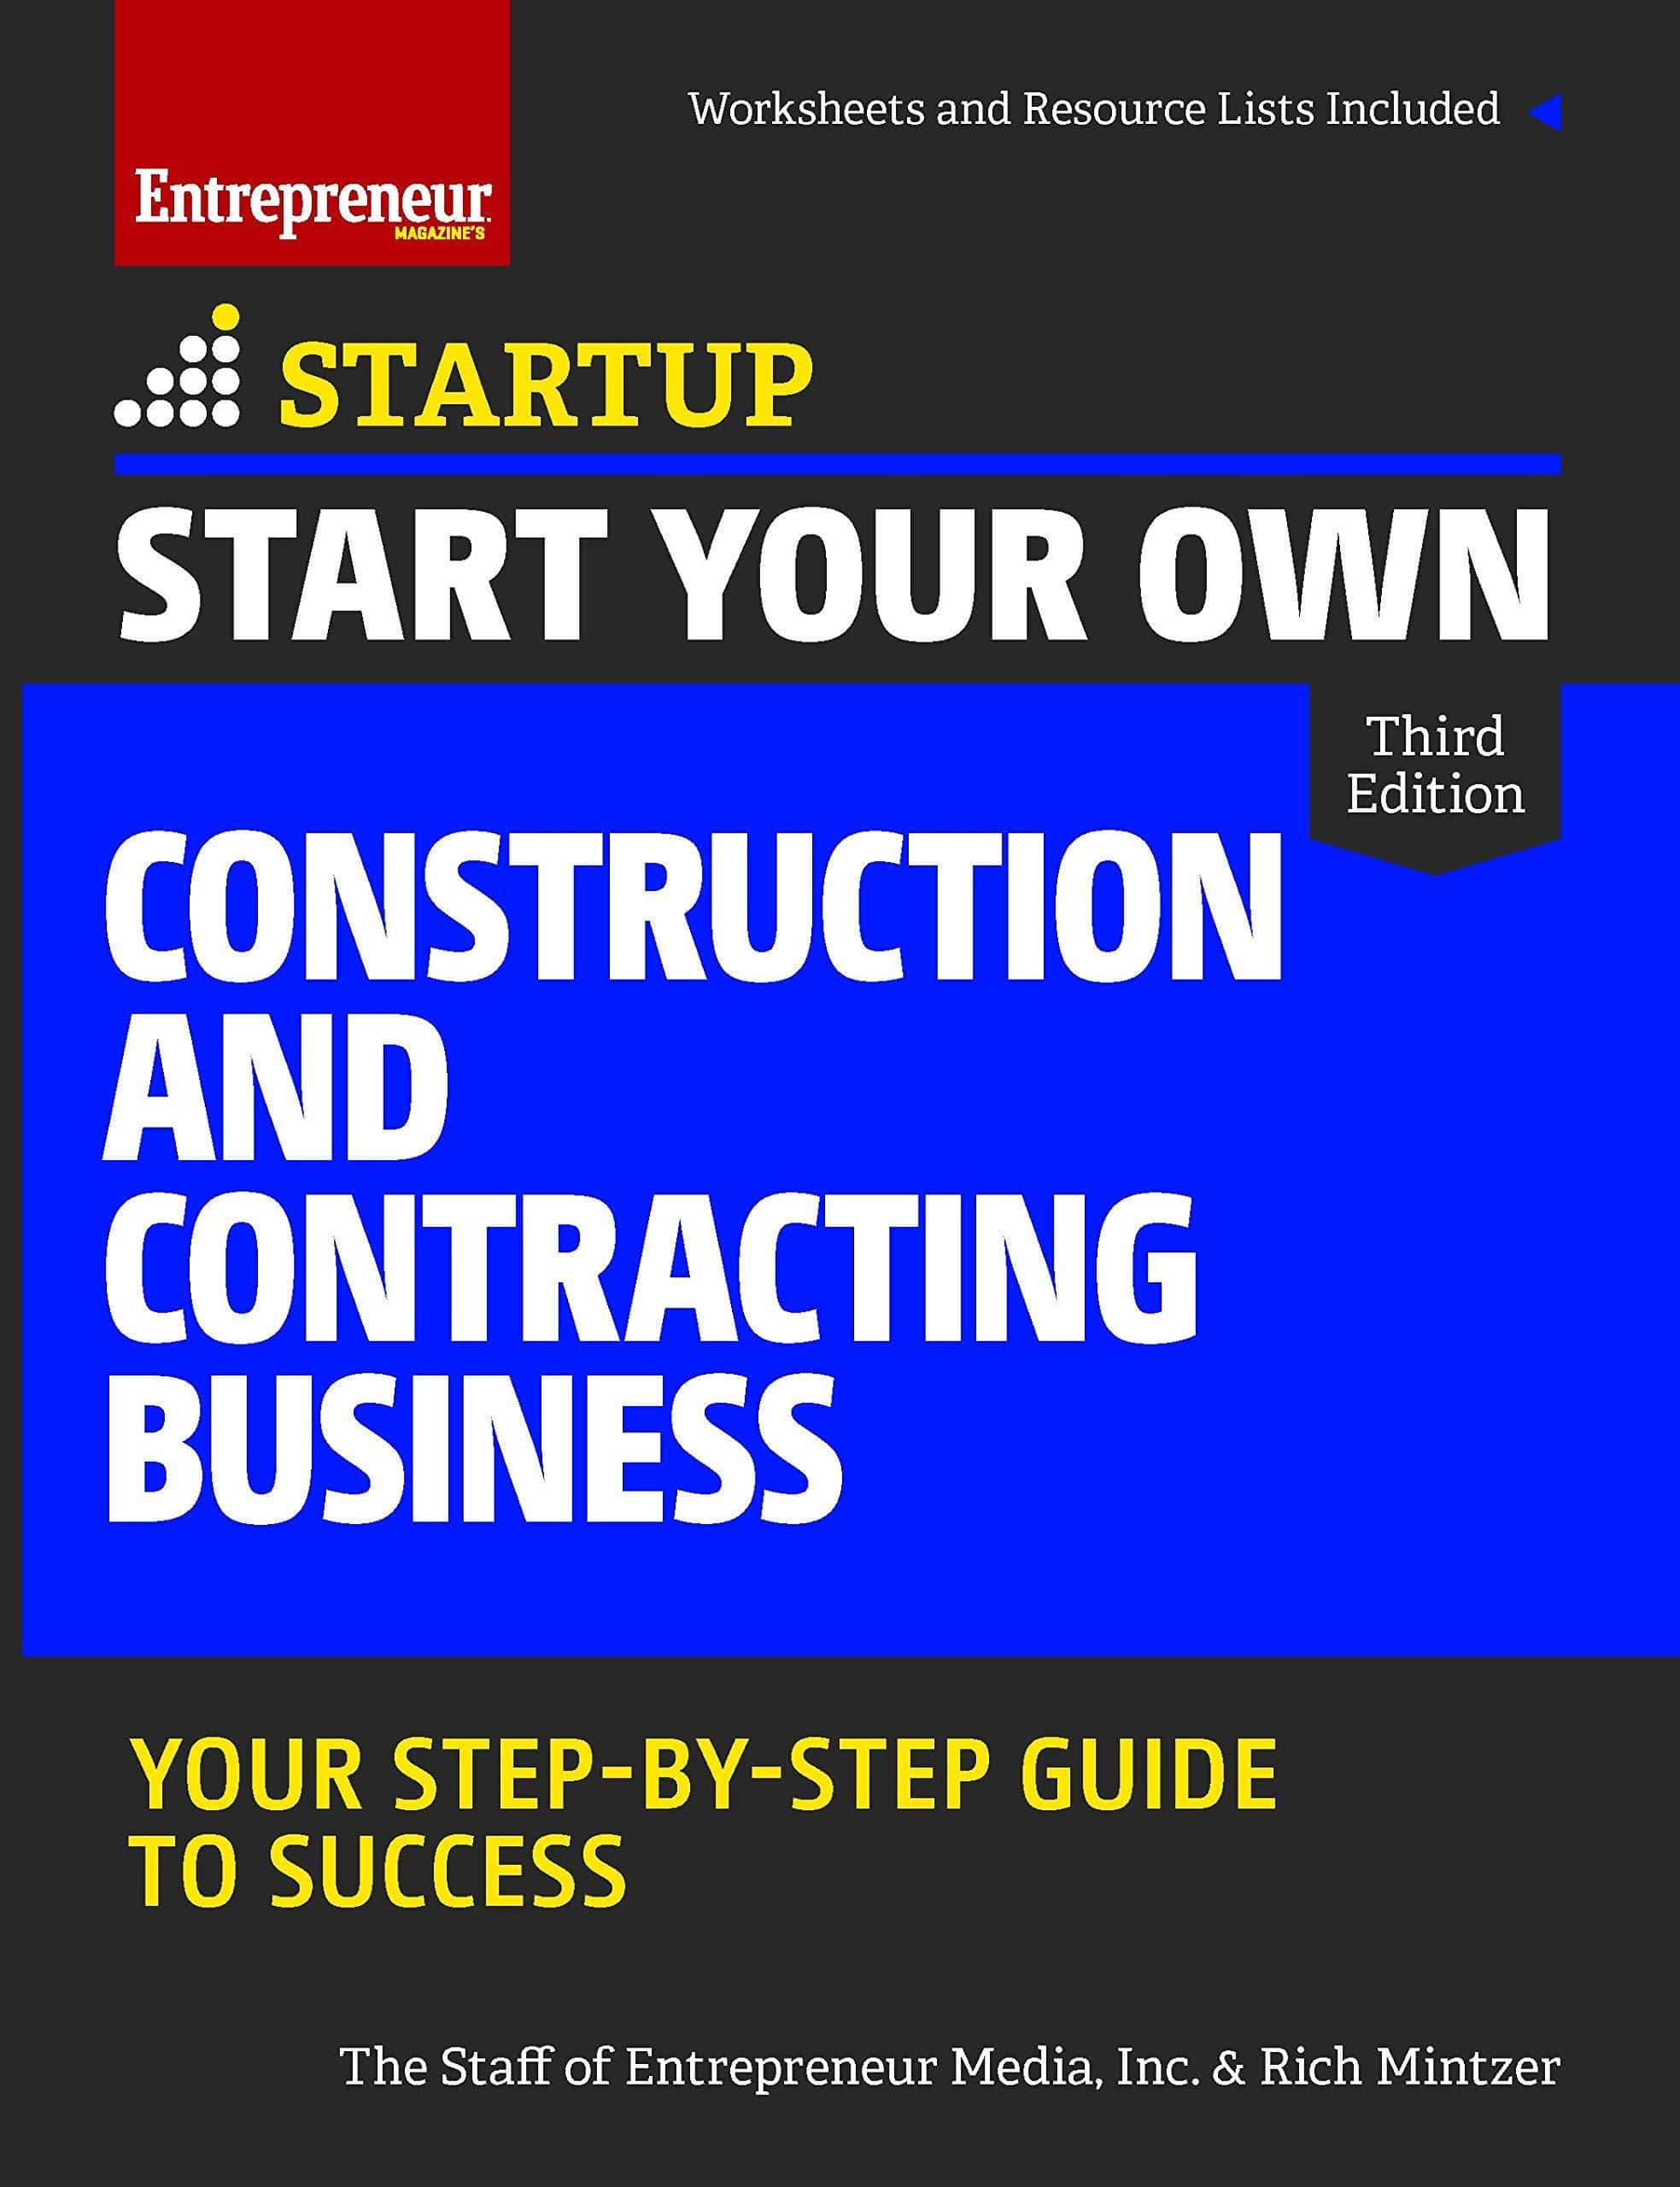 Start Your Own Construction and Contracting Business - SureShot Books Publishing LLC